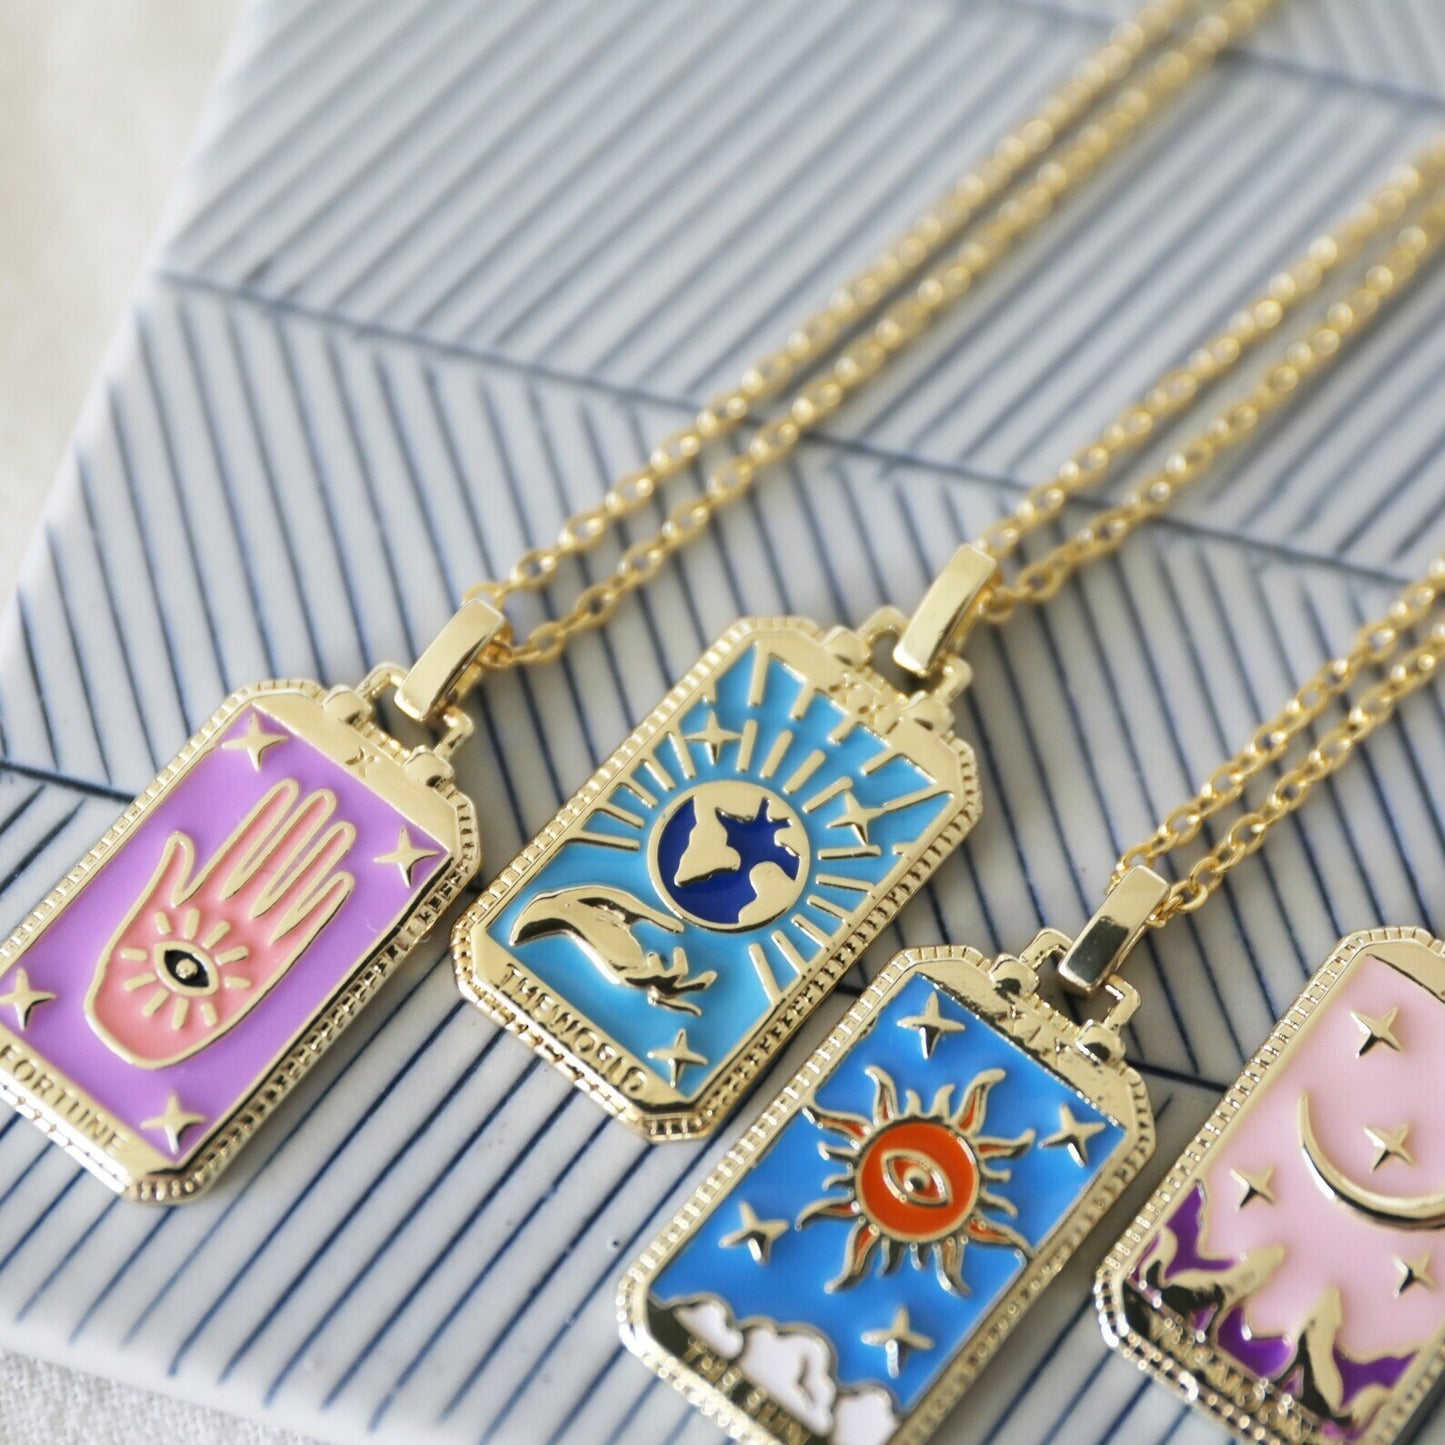 2022 New Stainless Steel Tarnish Free Jewelry Tarot Necklace Star Moon Sun World Design Gold Pendant Necklaces For Women